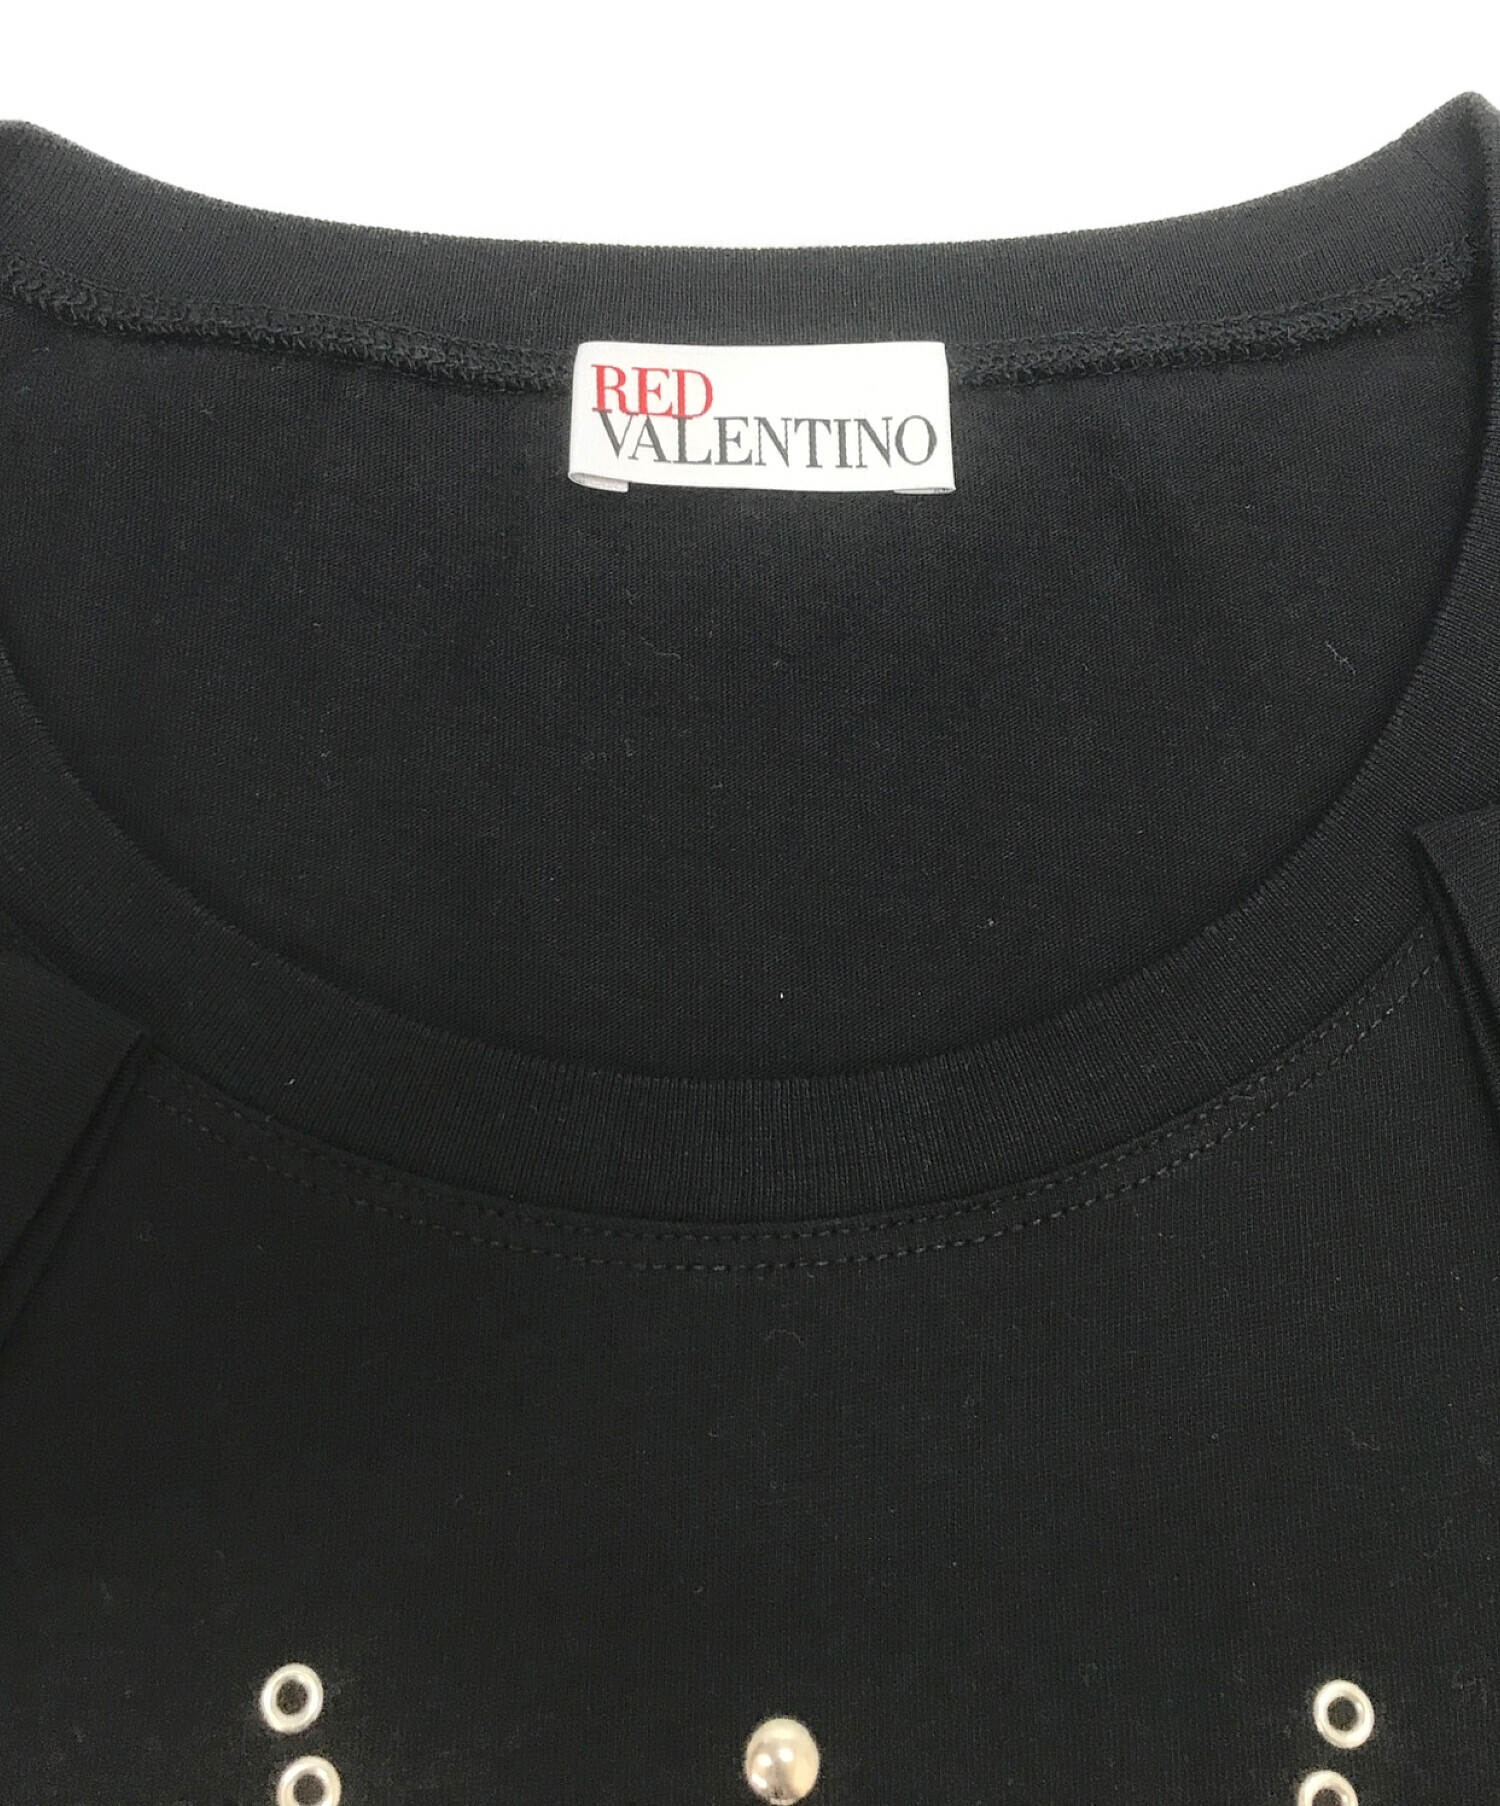 RED VALENTINO ダメージ加工　トップス　S size